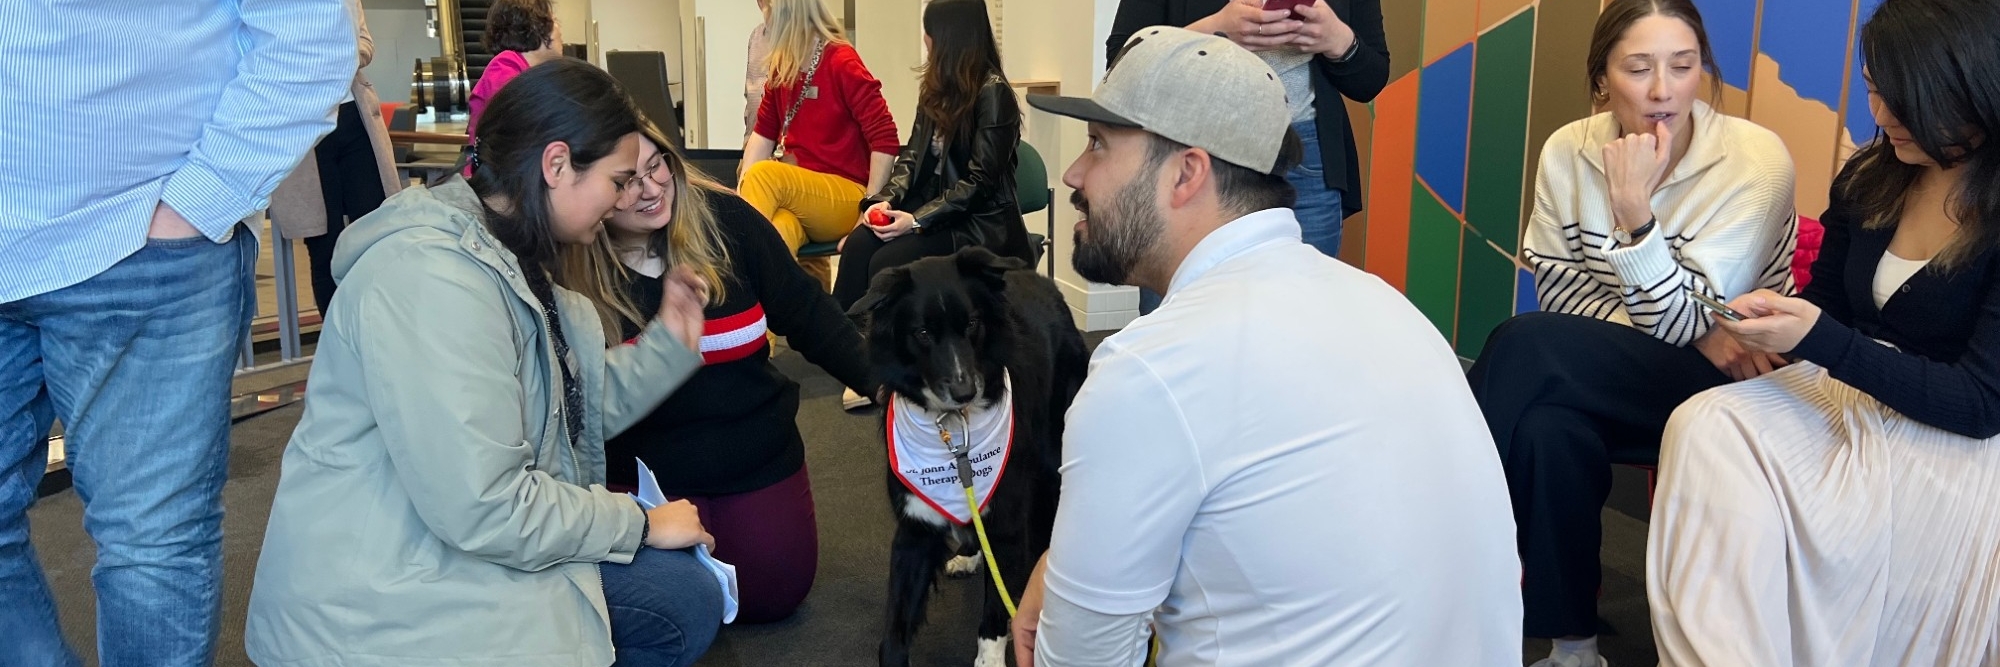 A crowd of people enjoying visiting with a black and white dog wearing a St. John's Ambulance bandana at a Dog Therapy event 